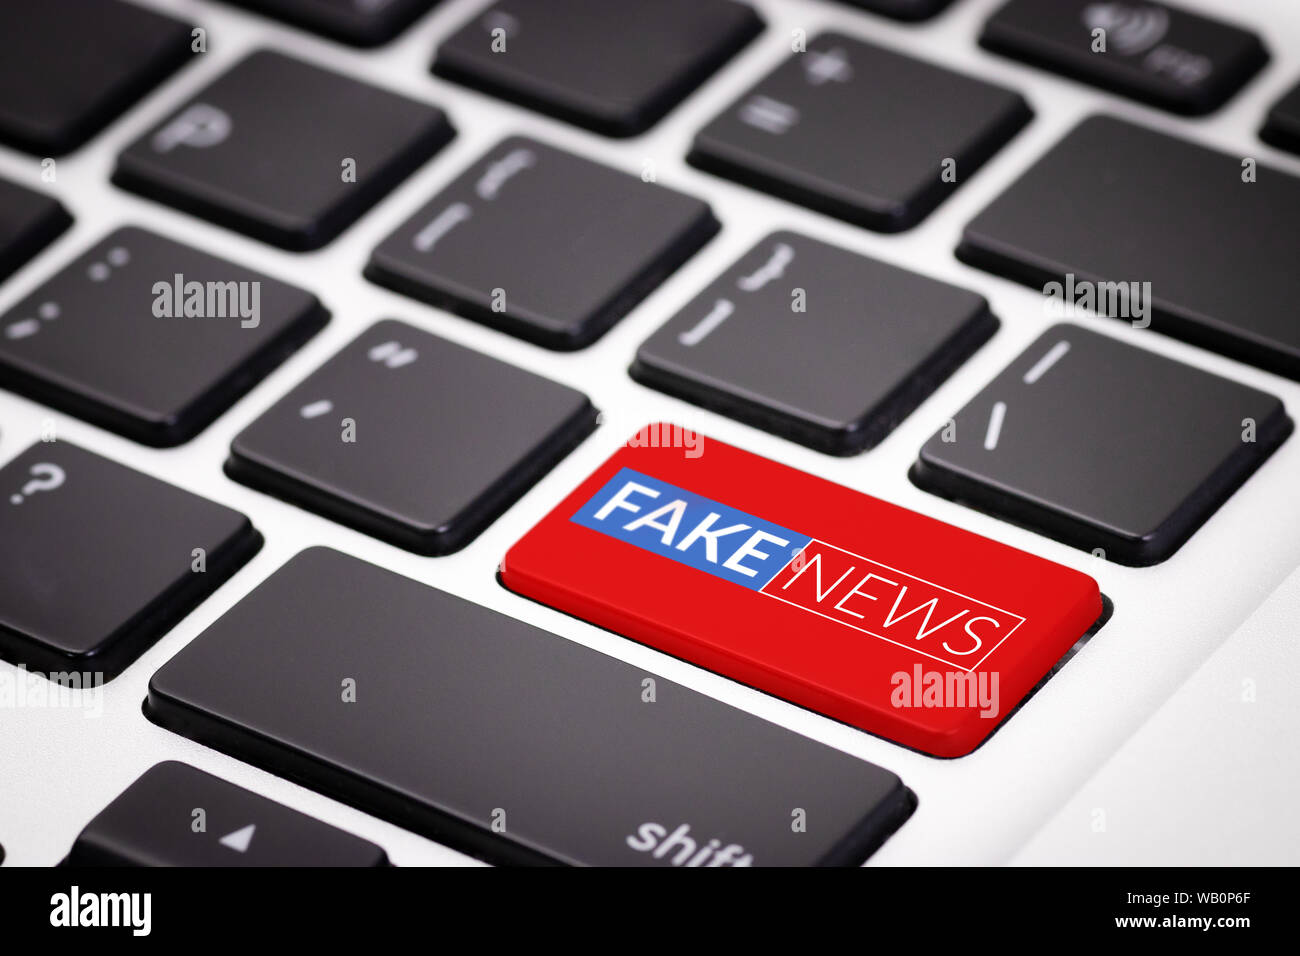 red fake news button on laptop keyboard. fake news on internet in modern digital age concept Stock Photo